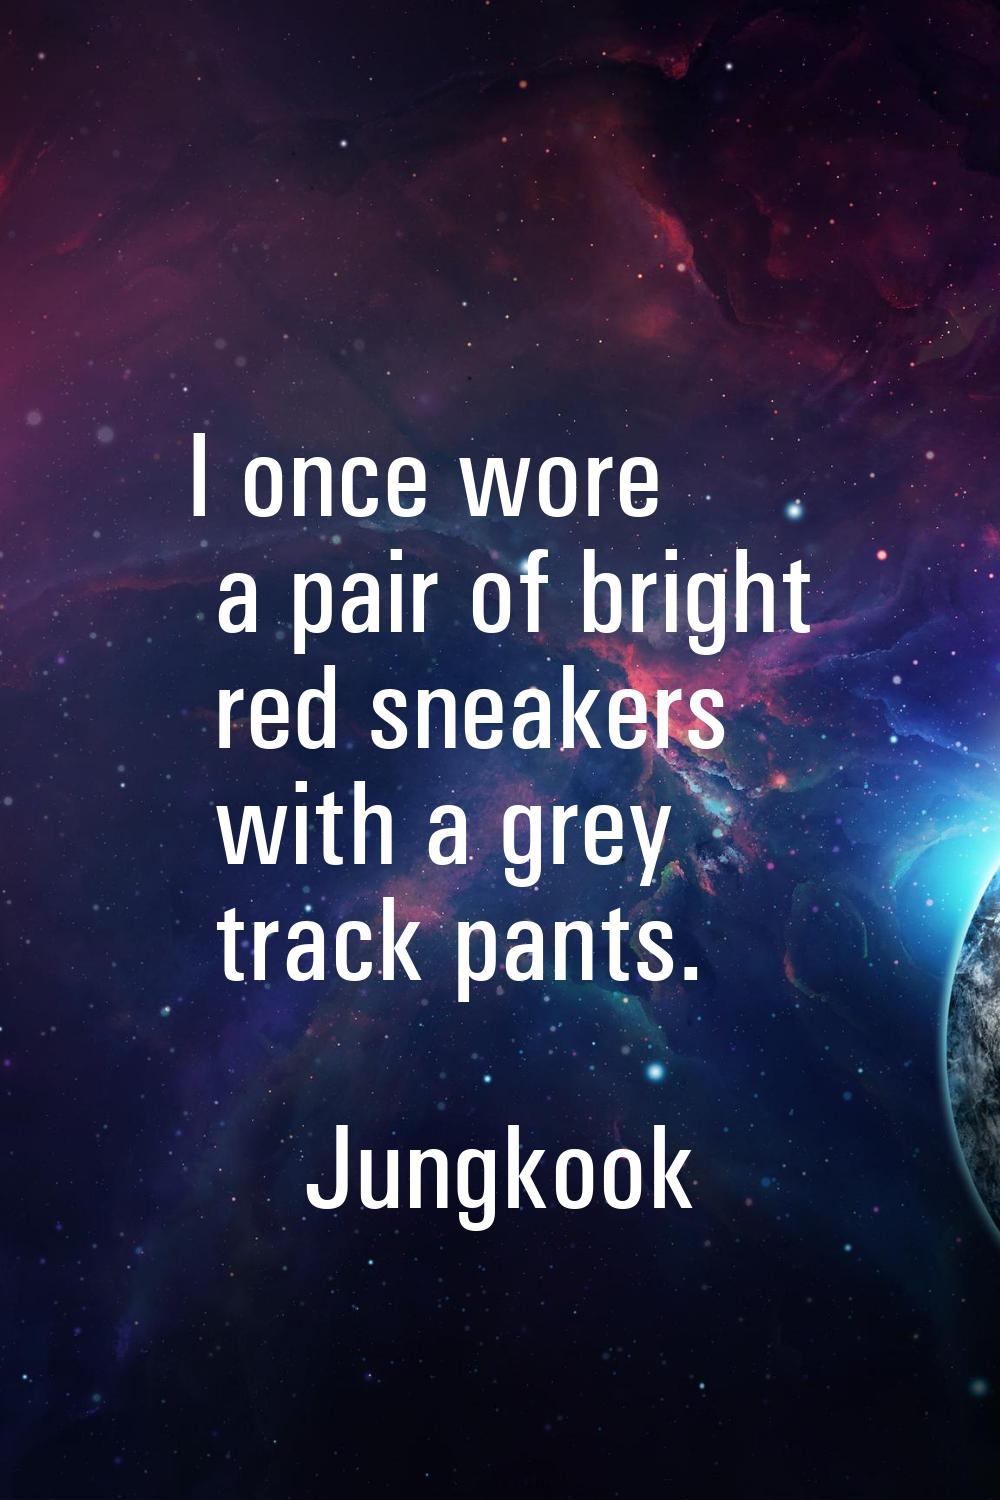 I once wore a pair of bright red sneakers with a grey track pants.